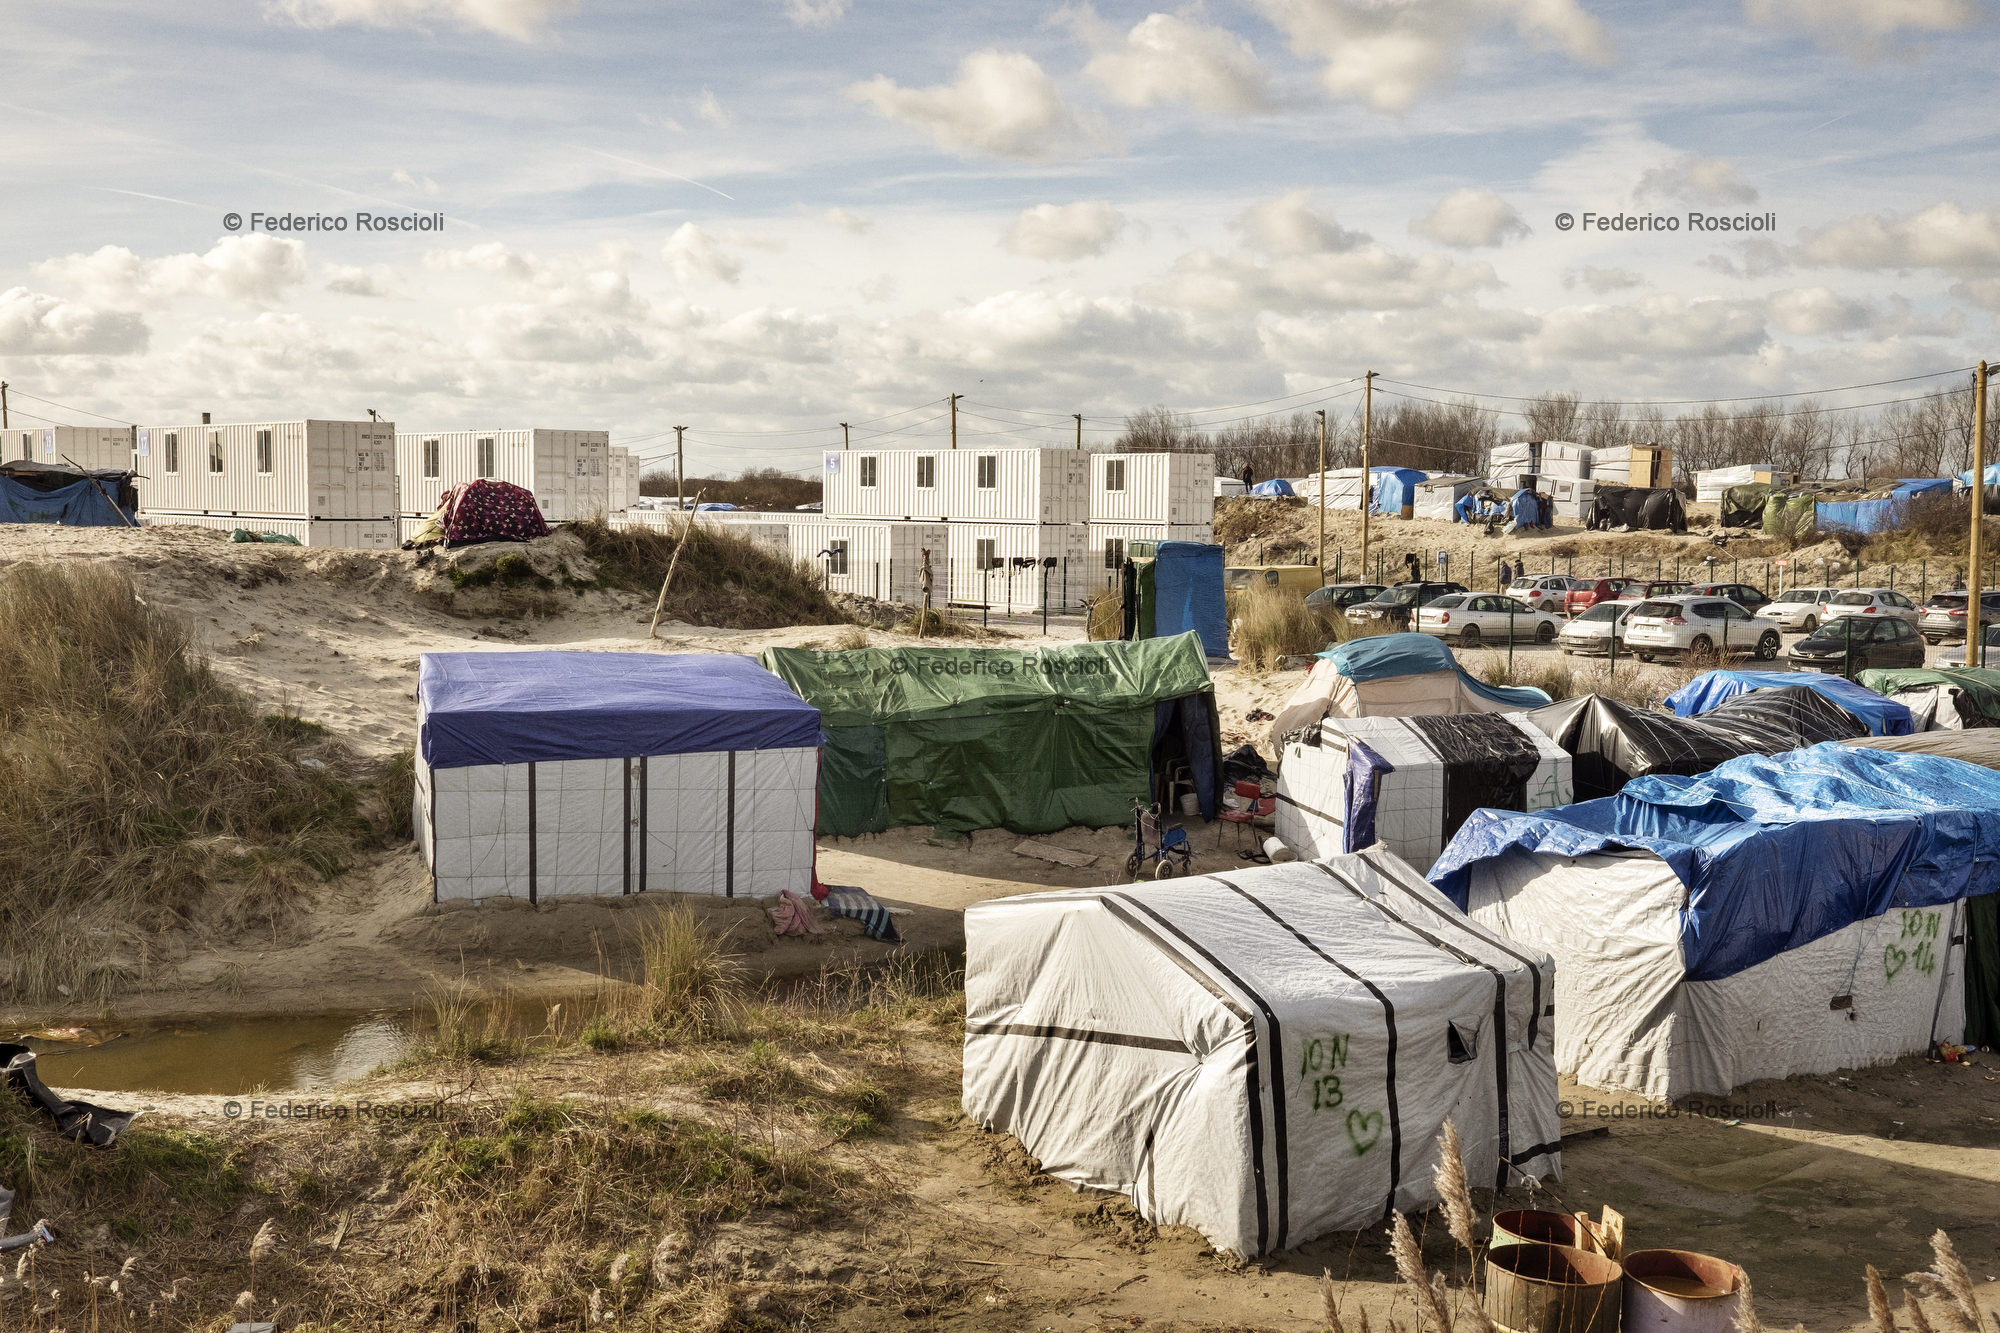 Calais, France. February 28, 2016. The container area inside the camp. This area was built in January 2016, it is accessible only by fingerprints and once in you lose the chance of reaching the UK.